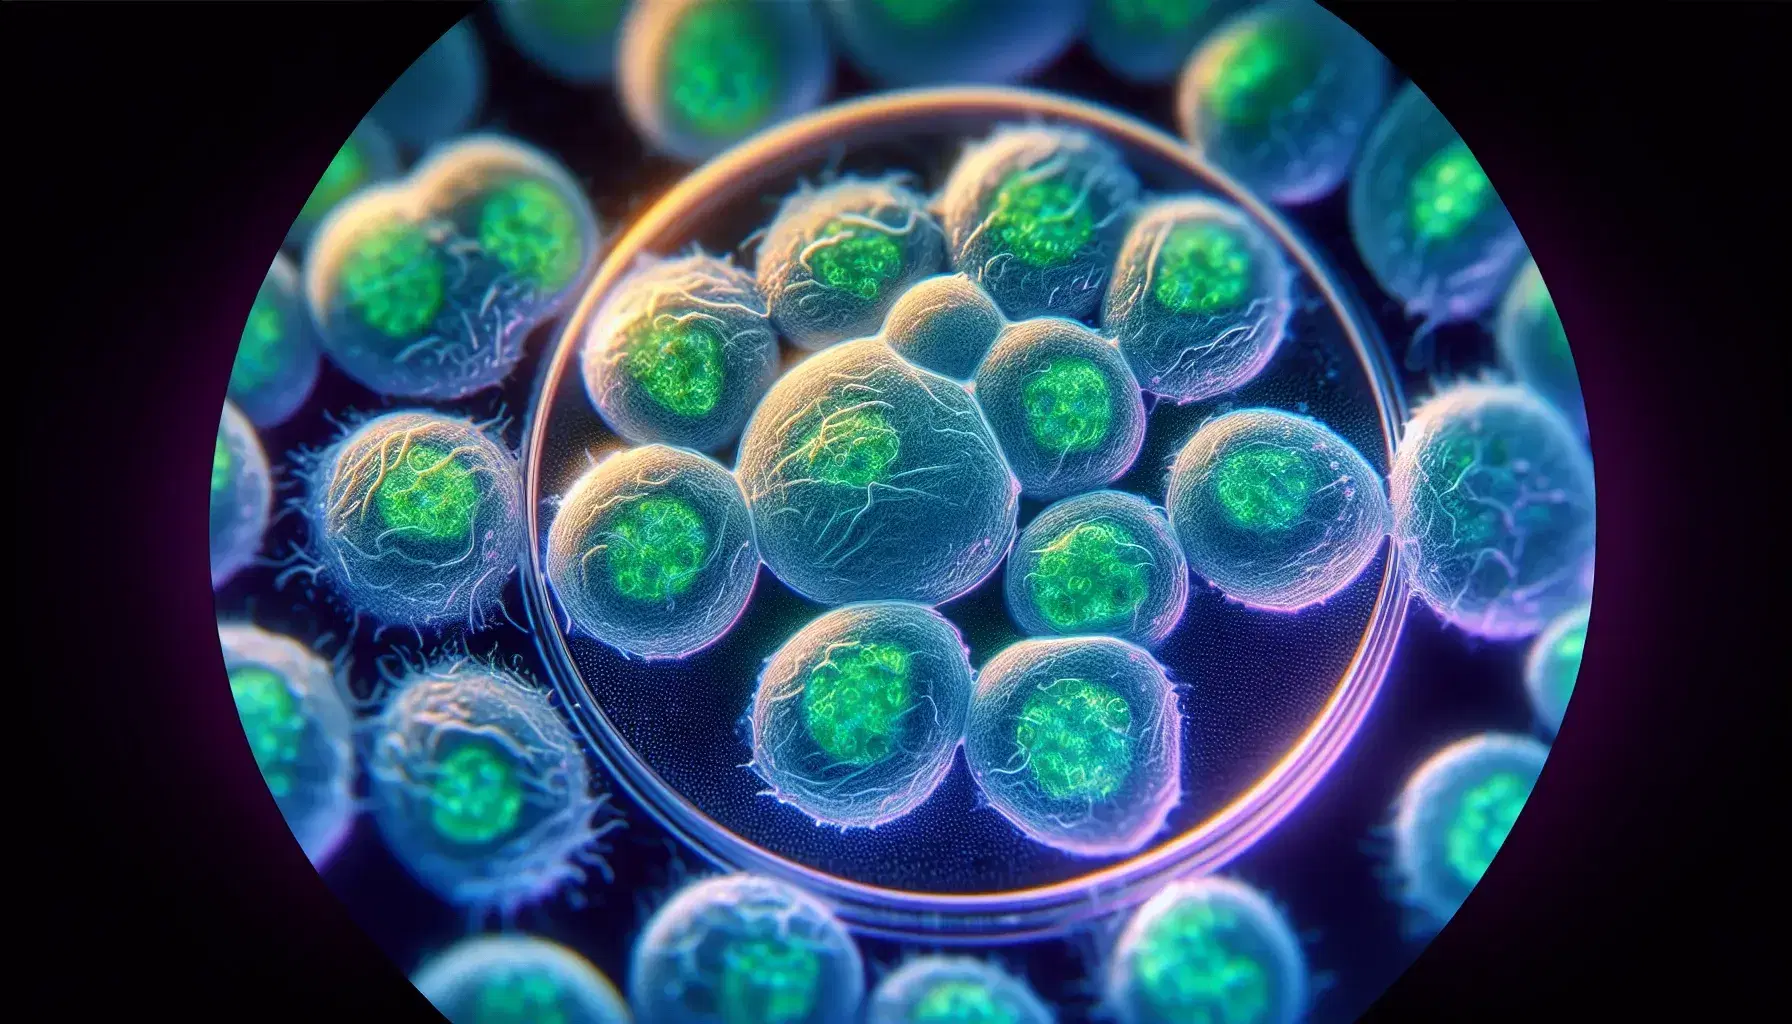 Cell culture dividing under microscope, with membranes highlighted in green and nuclei in blue, purple shade in the background.